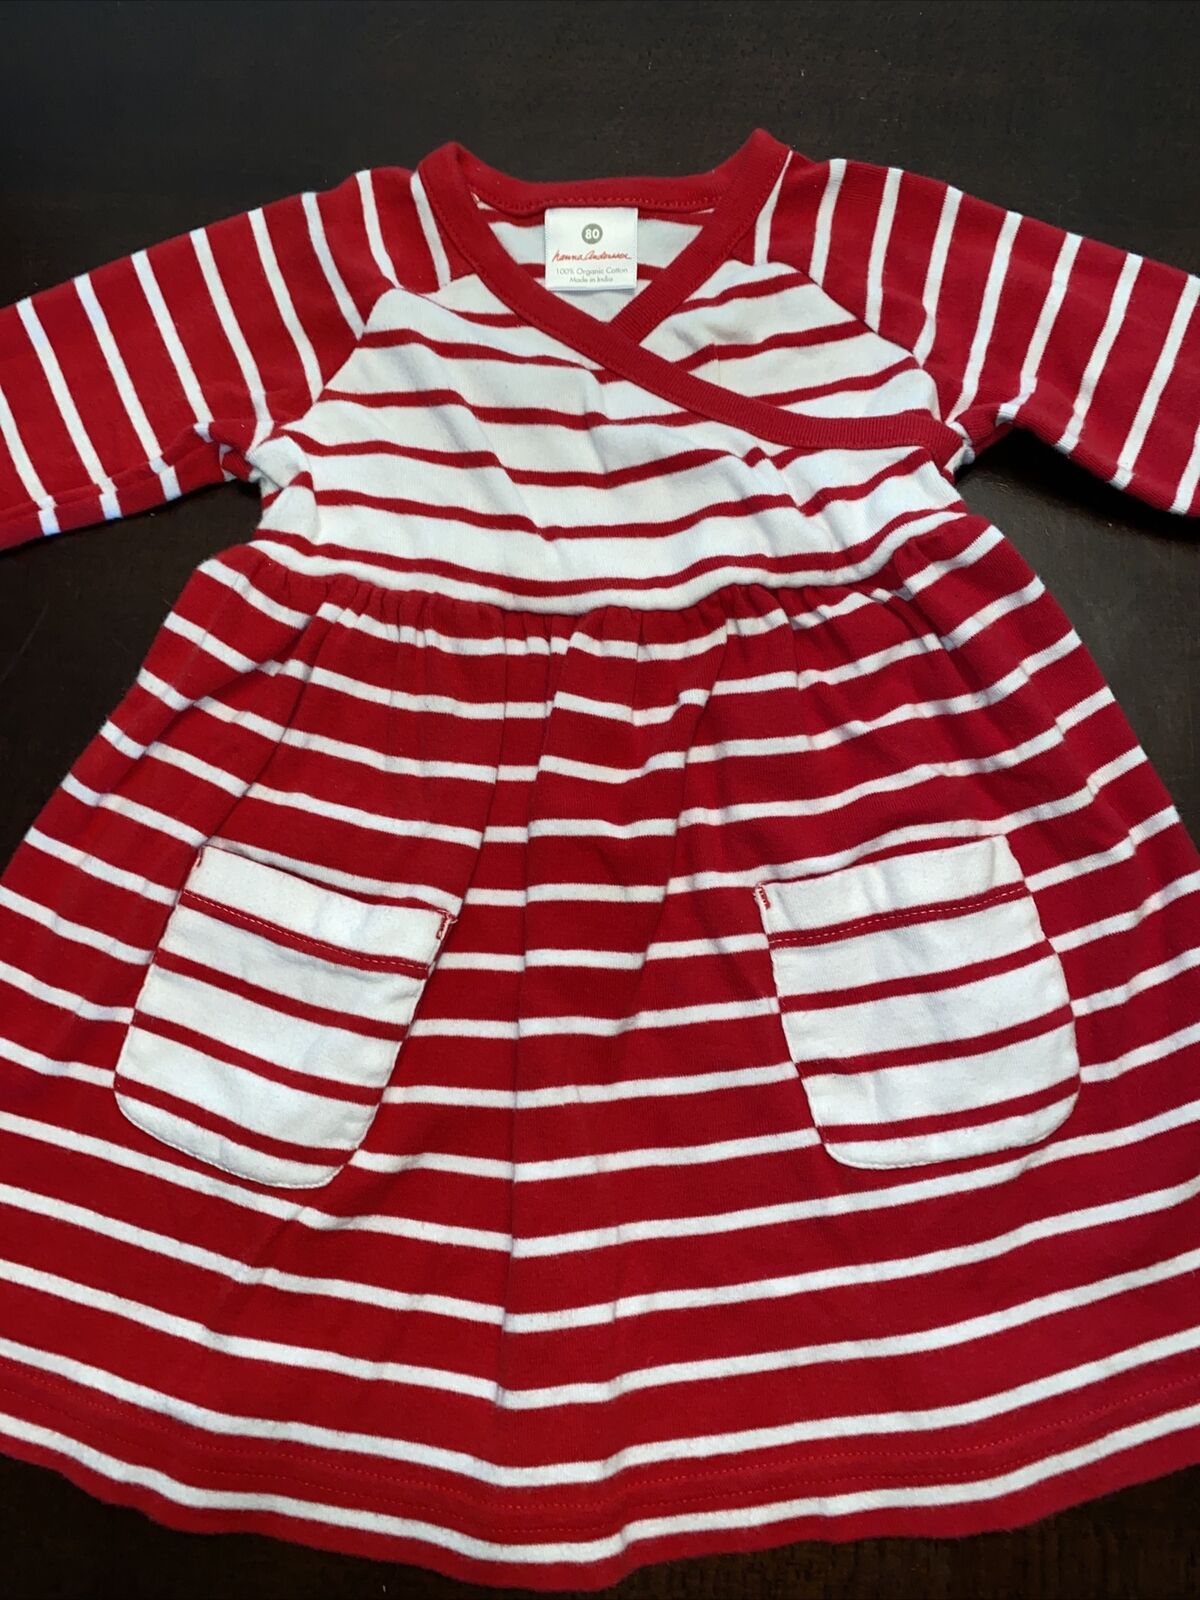 Hanna Andersson Toddler Girls Size 80, 18-24 Red, White Striped Dress